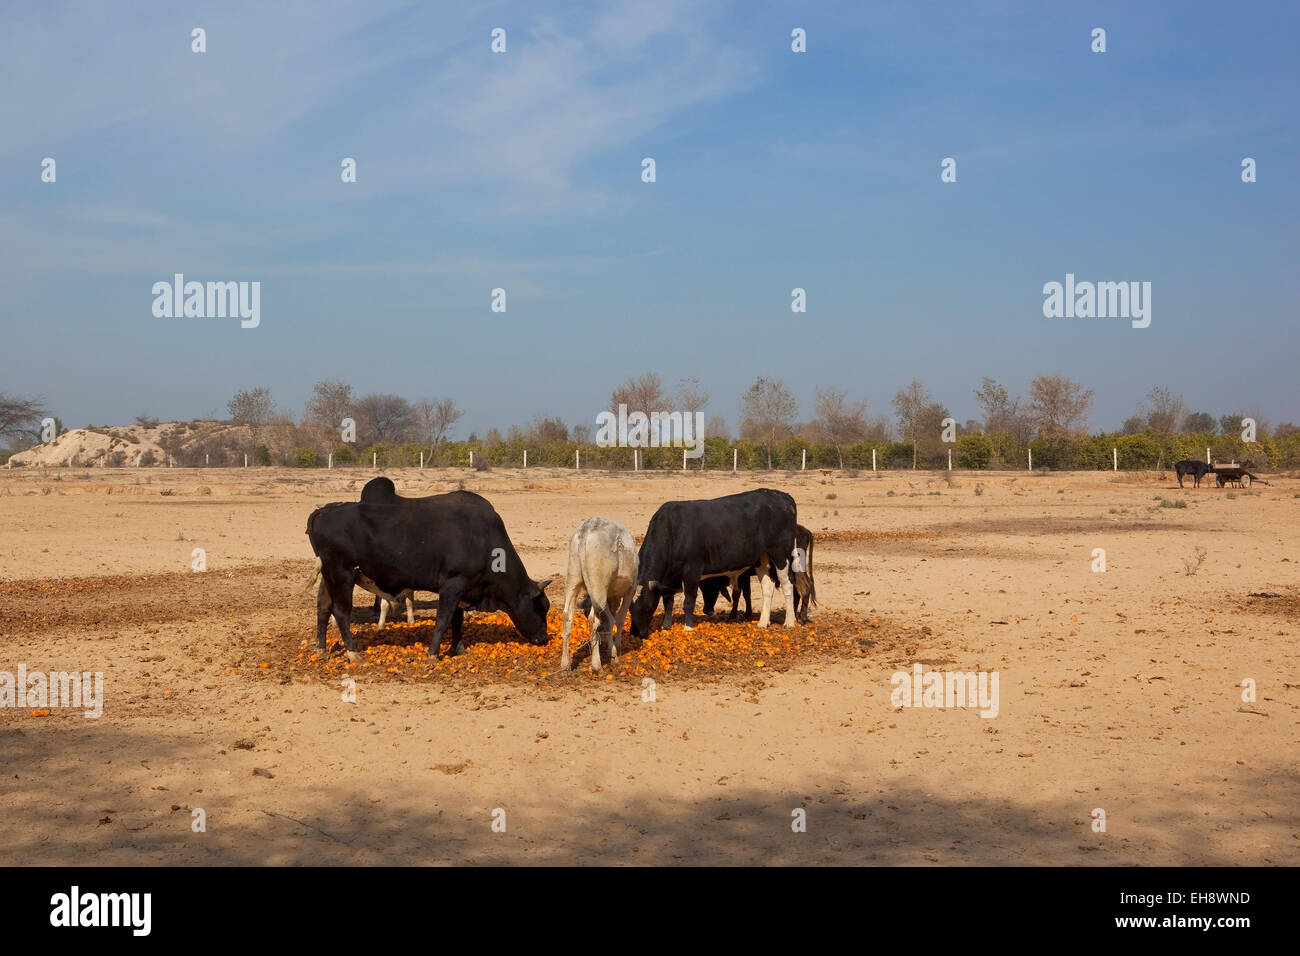 Cattle eating discarded oranges in a dry dusty Punjabi landscape Stock Photo